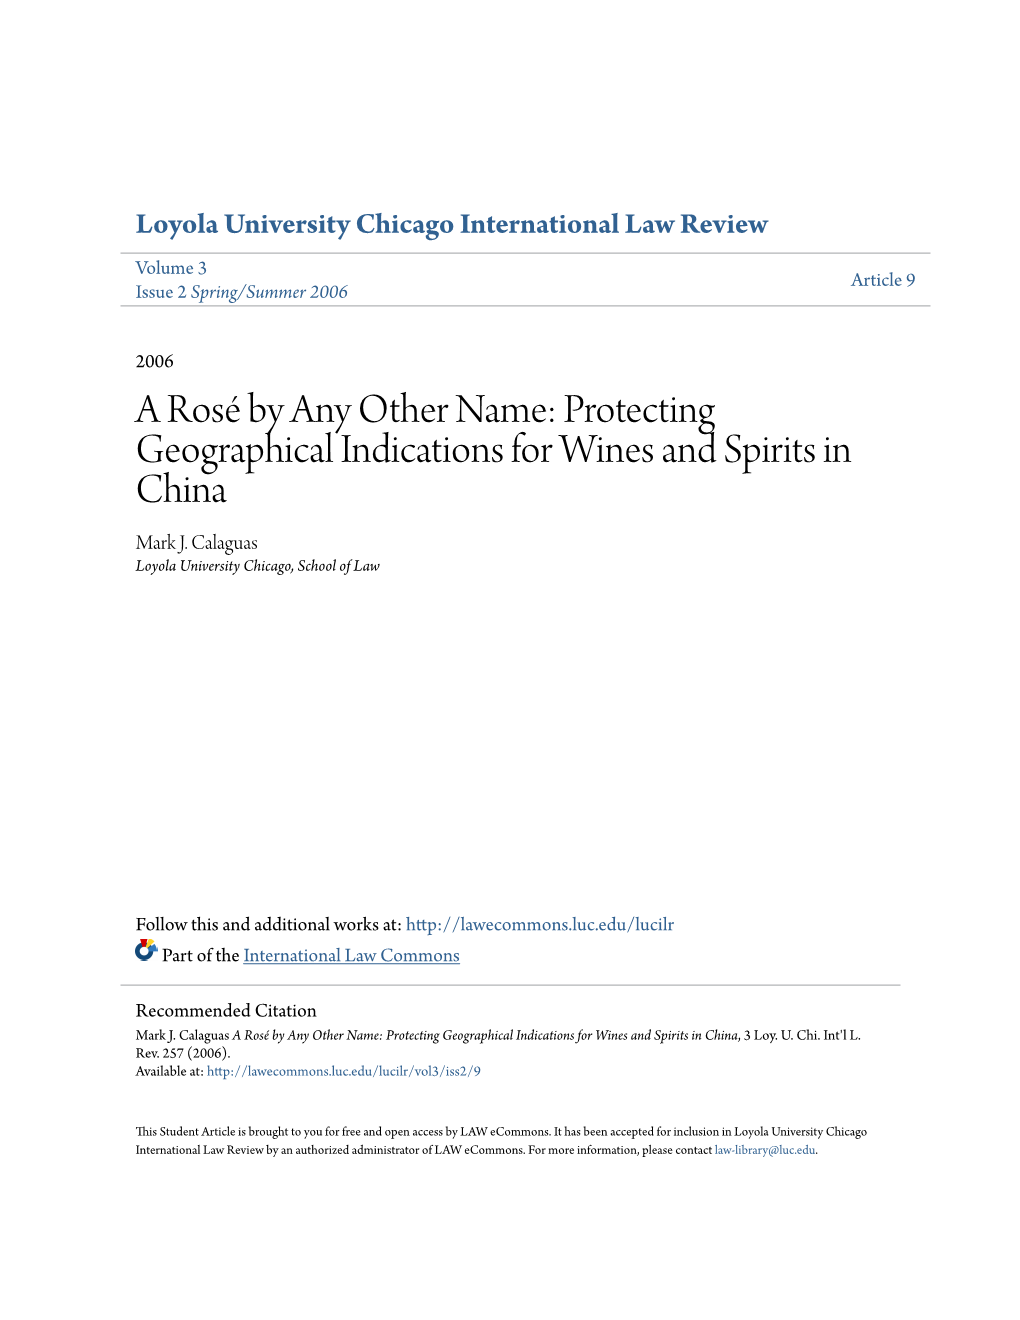 Protecting Geographical Indications for Wines and Spirits in China Mark J